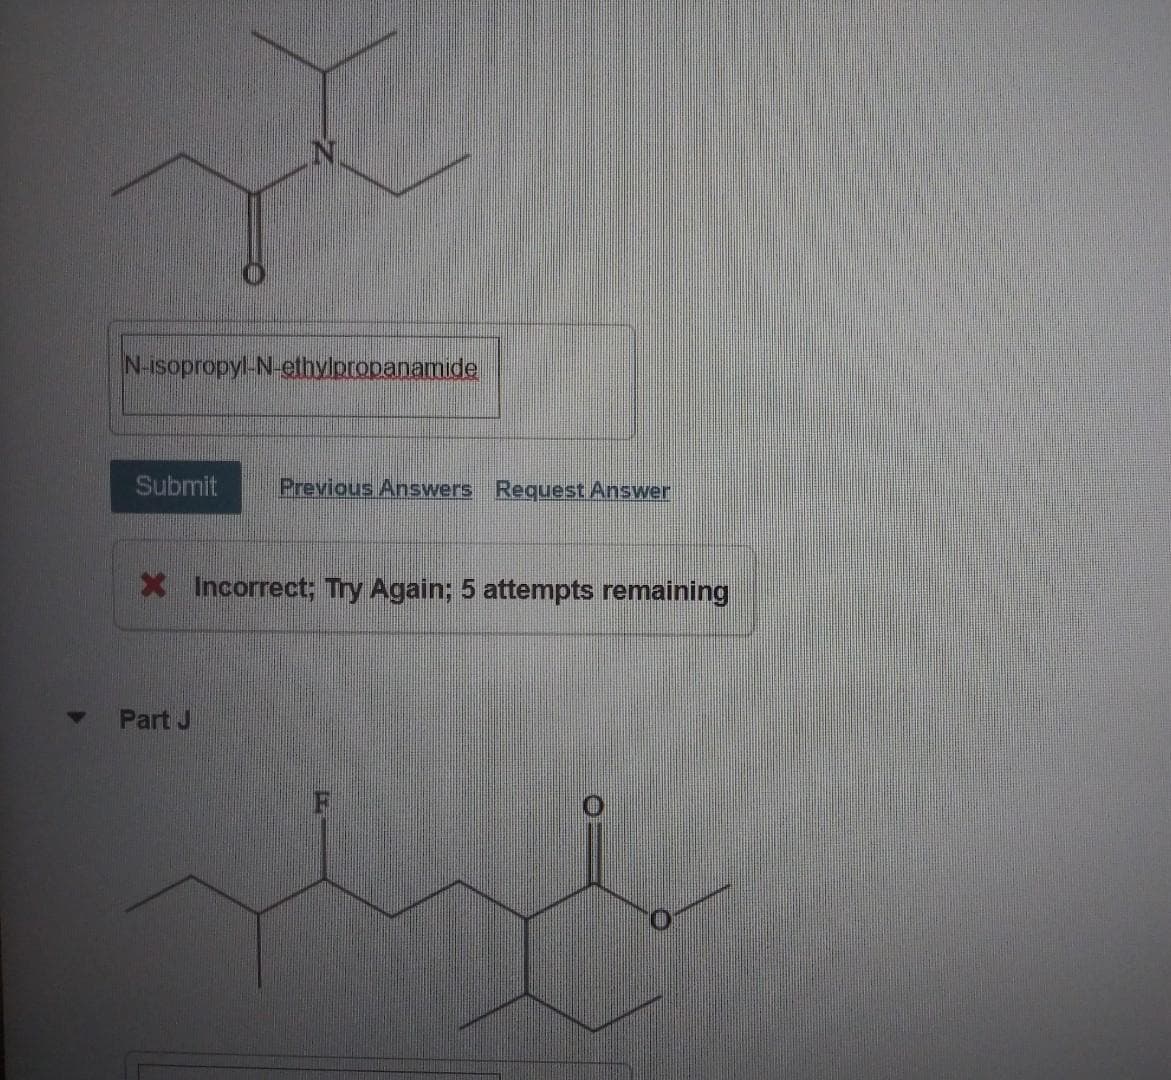 N-isopropyl-N-ethvloropanamide
Submit
Previous Answers Request Answer
X Incorrect; Try Again; 5 attempts remaining
Part J
